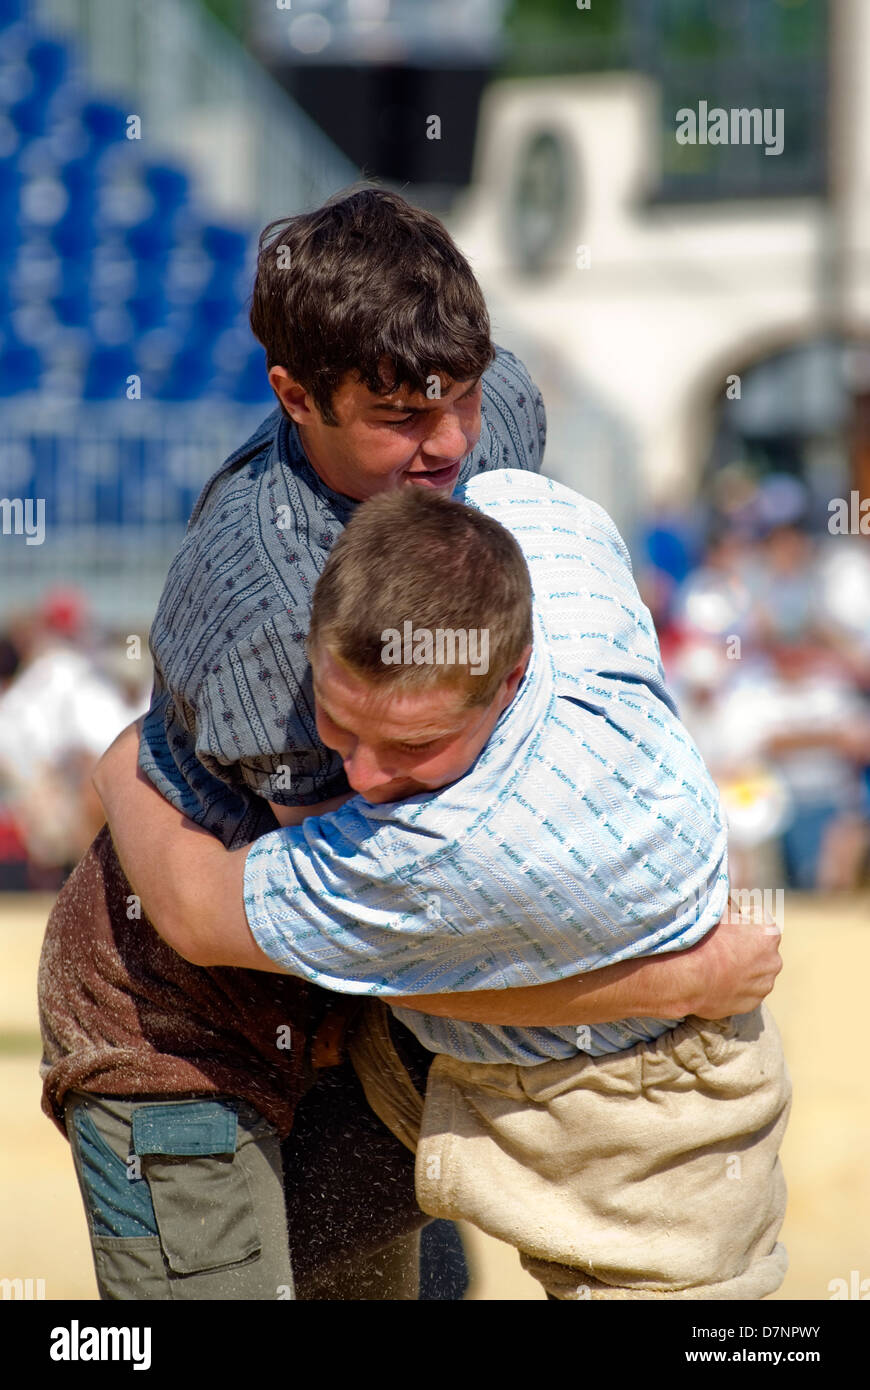 Schwingen (Swiss wrestling) at folklore festival, with spectators in background Stock Photo